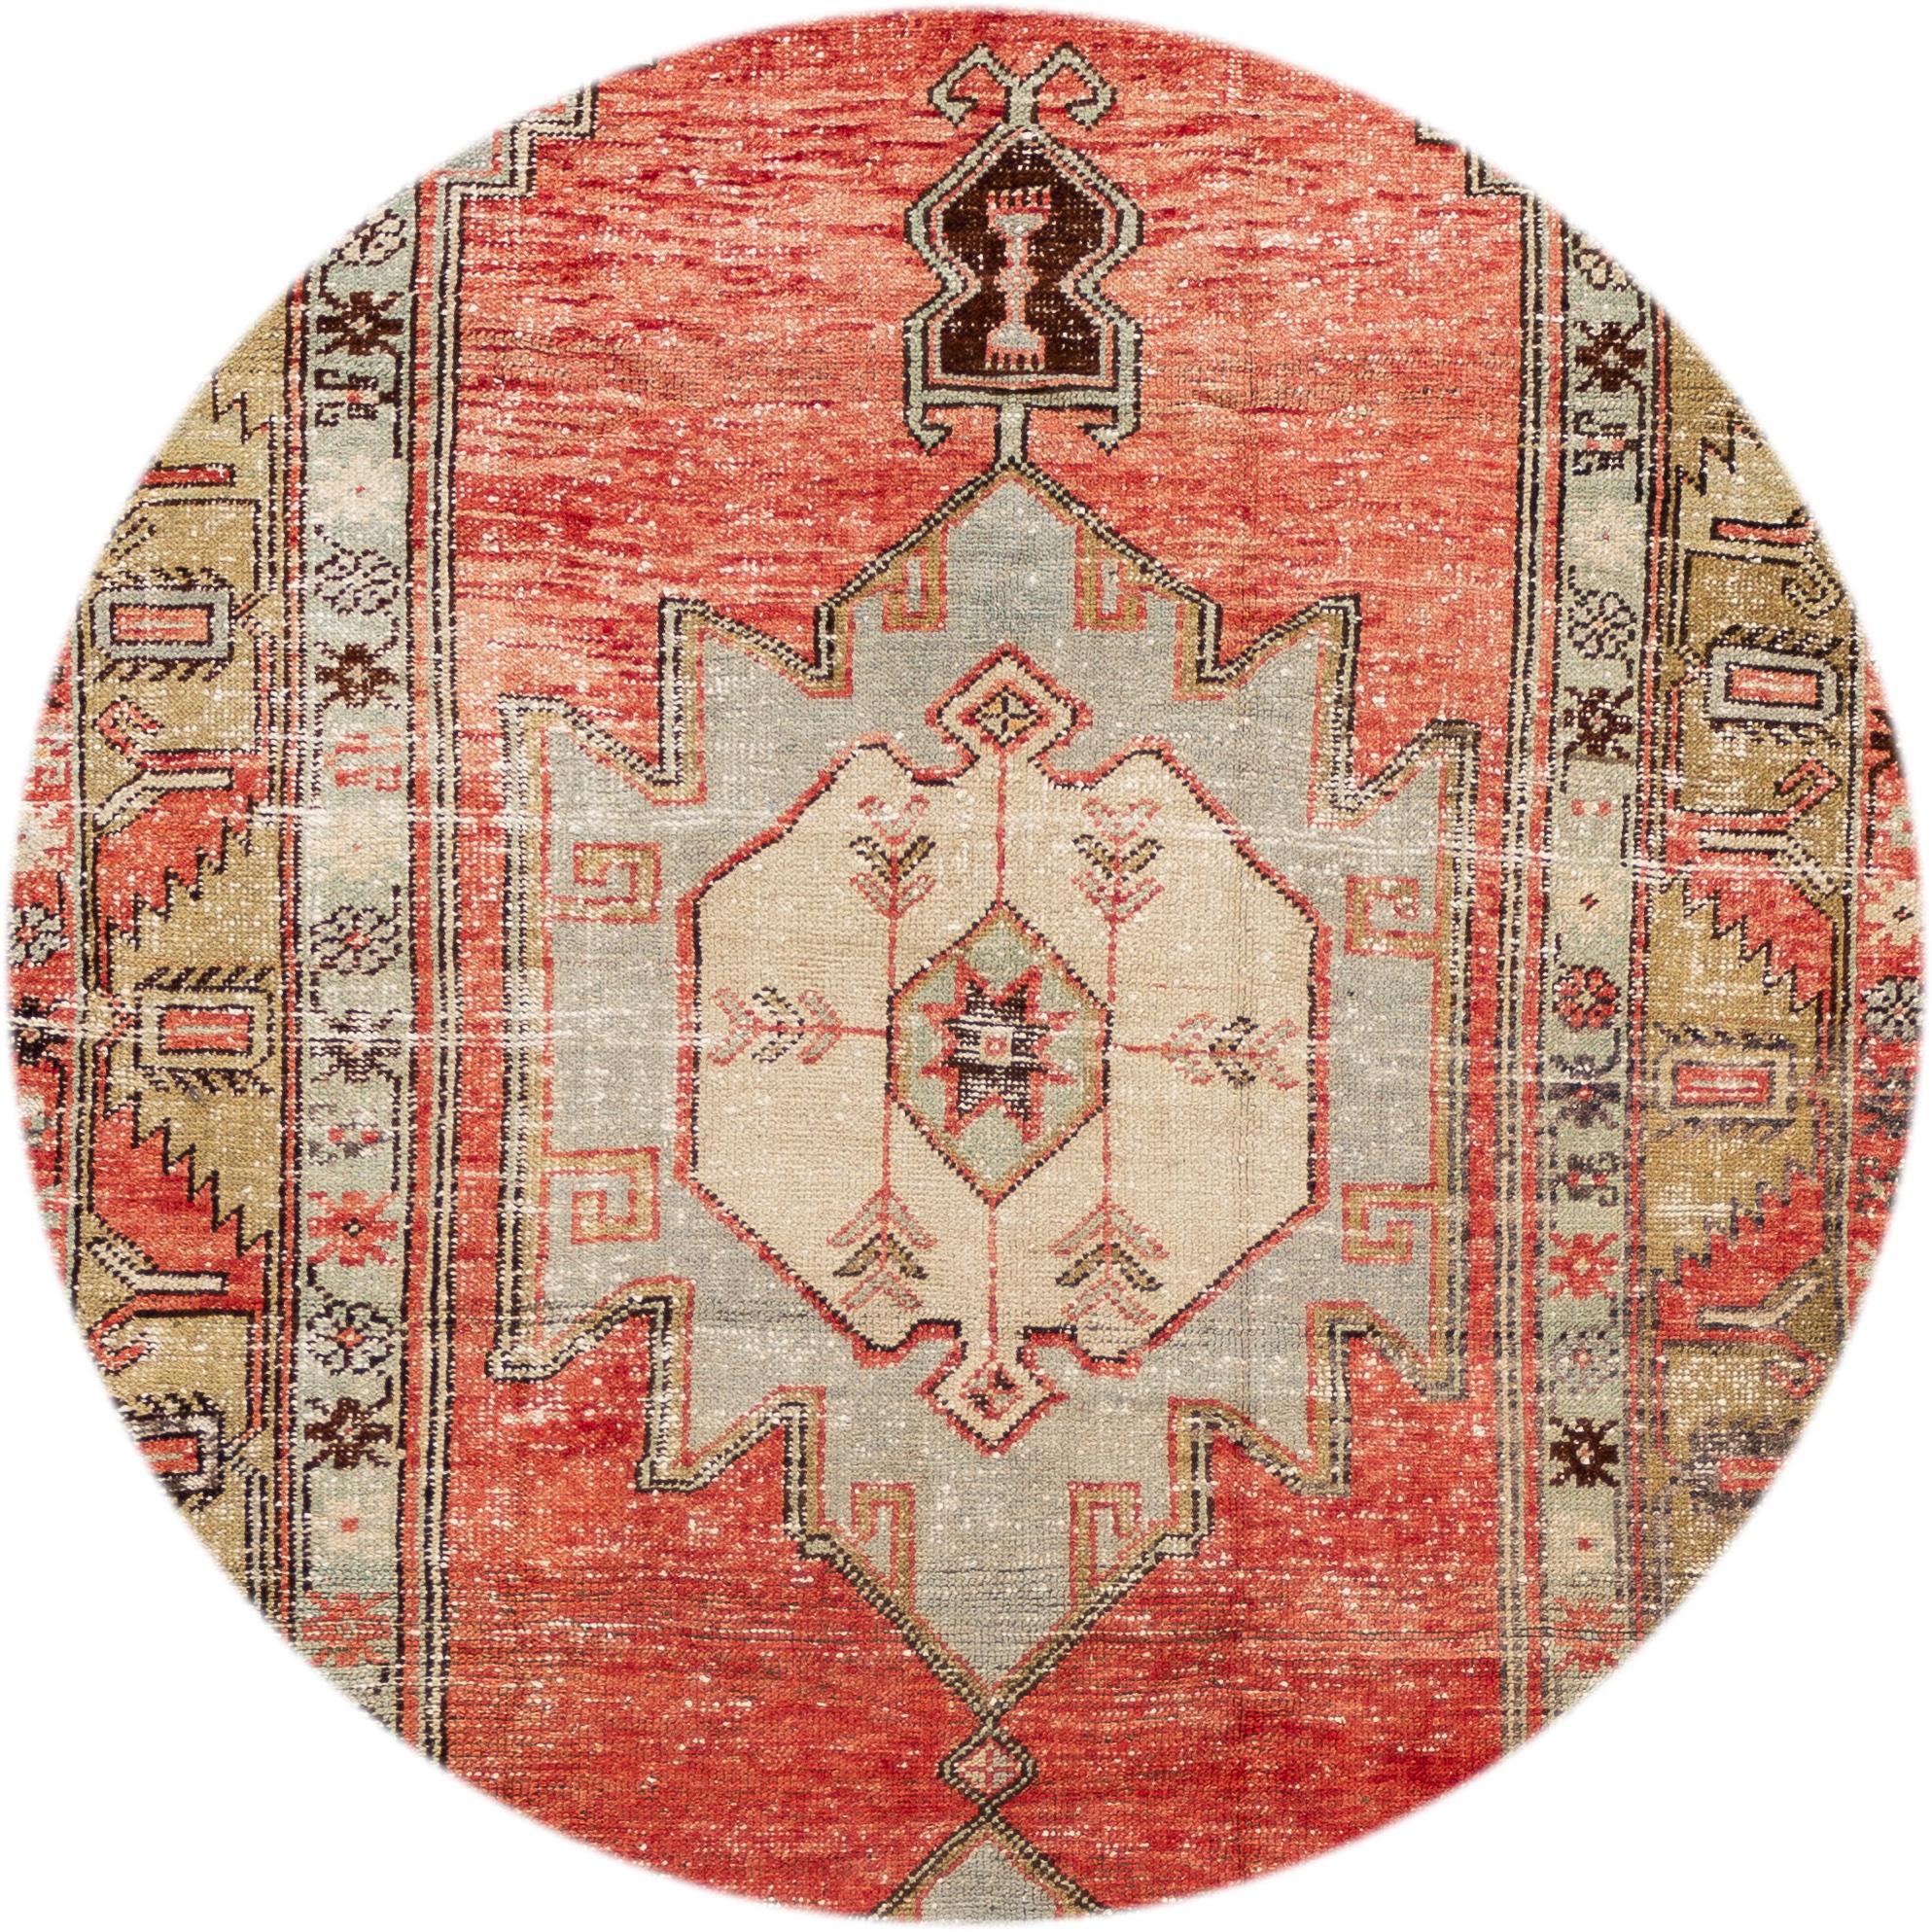 Beautiful antique Turkish Anatolian runner rug, hand knotted wool with an orange field, tan frame, light gray accents in allover multi medallion design.,
circa 1930s
This rug measures 4' 6